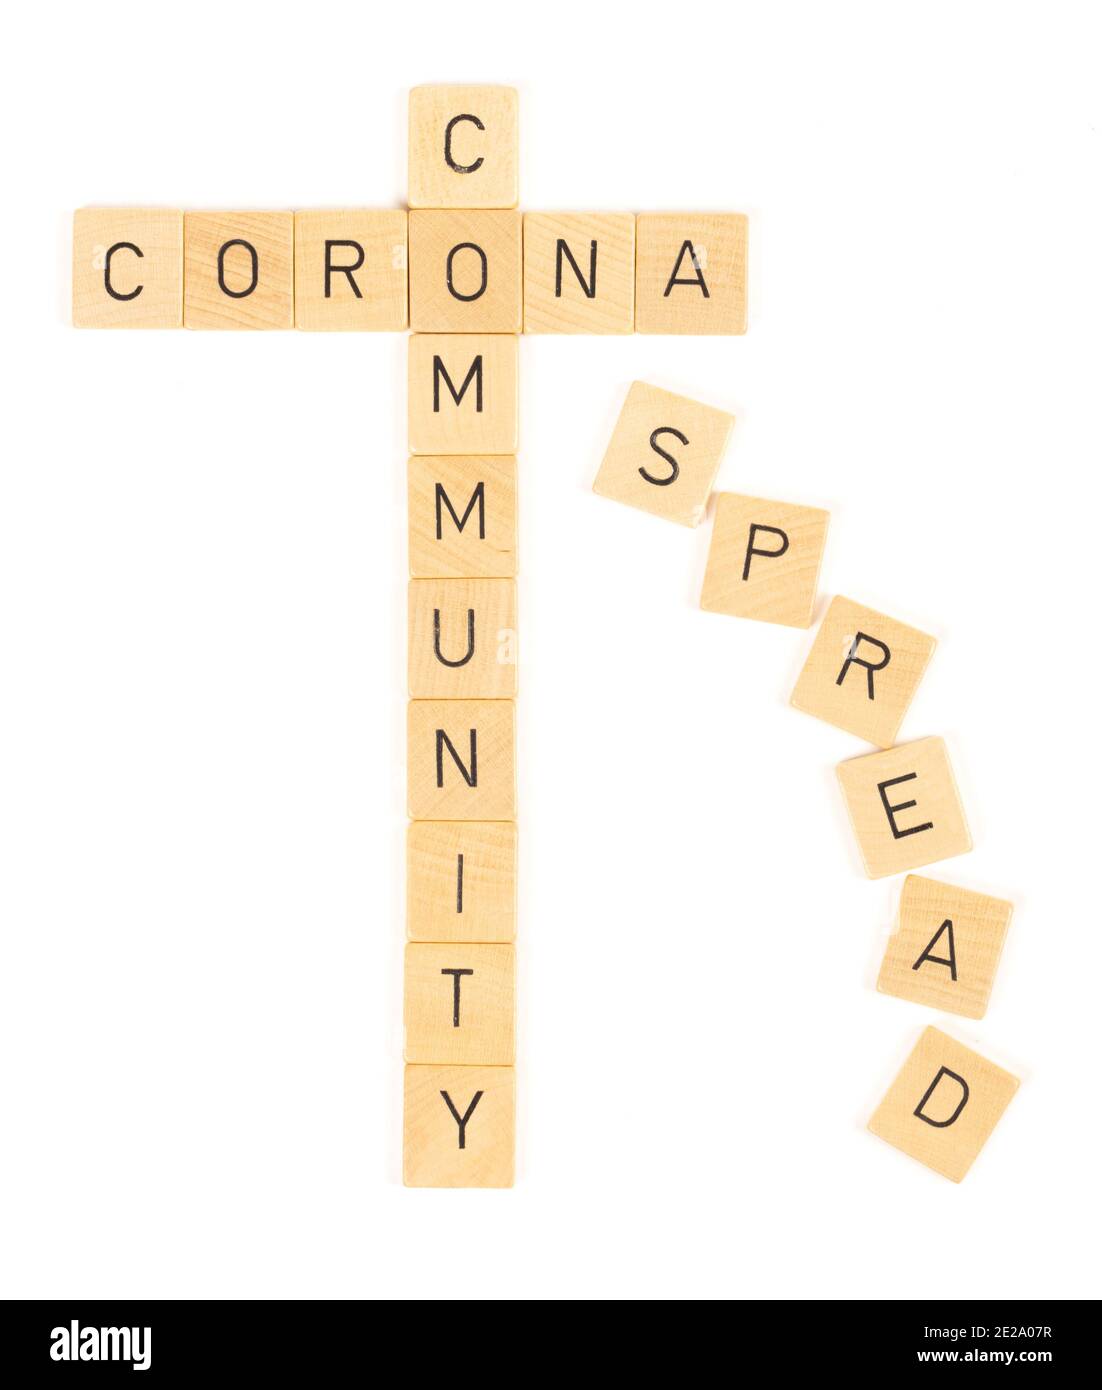 Corona community spread letters, isolated on a white background Stock Photo